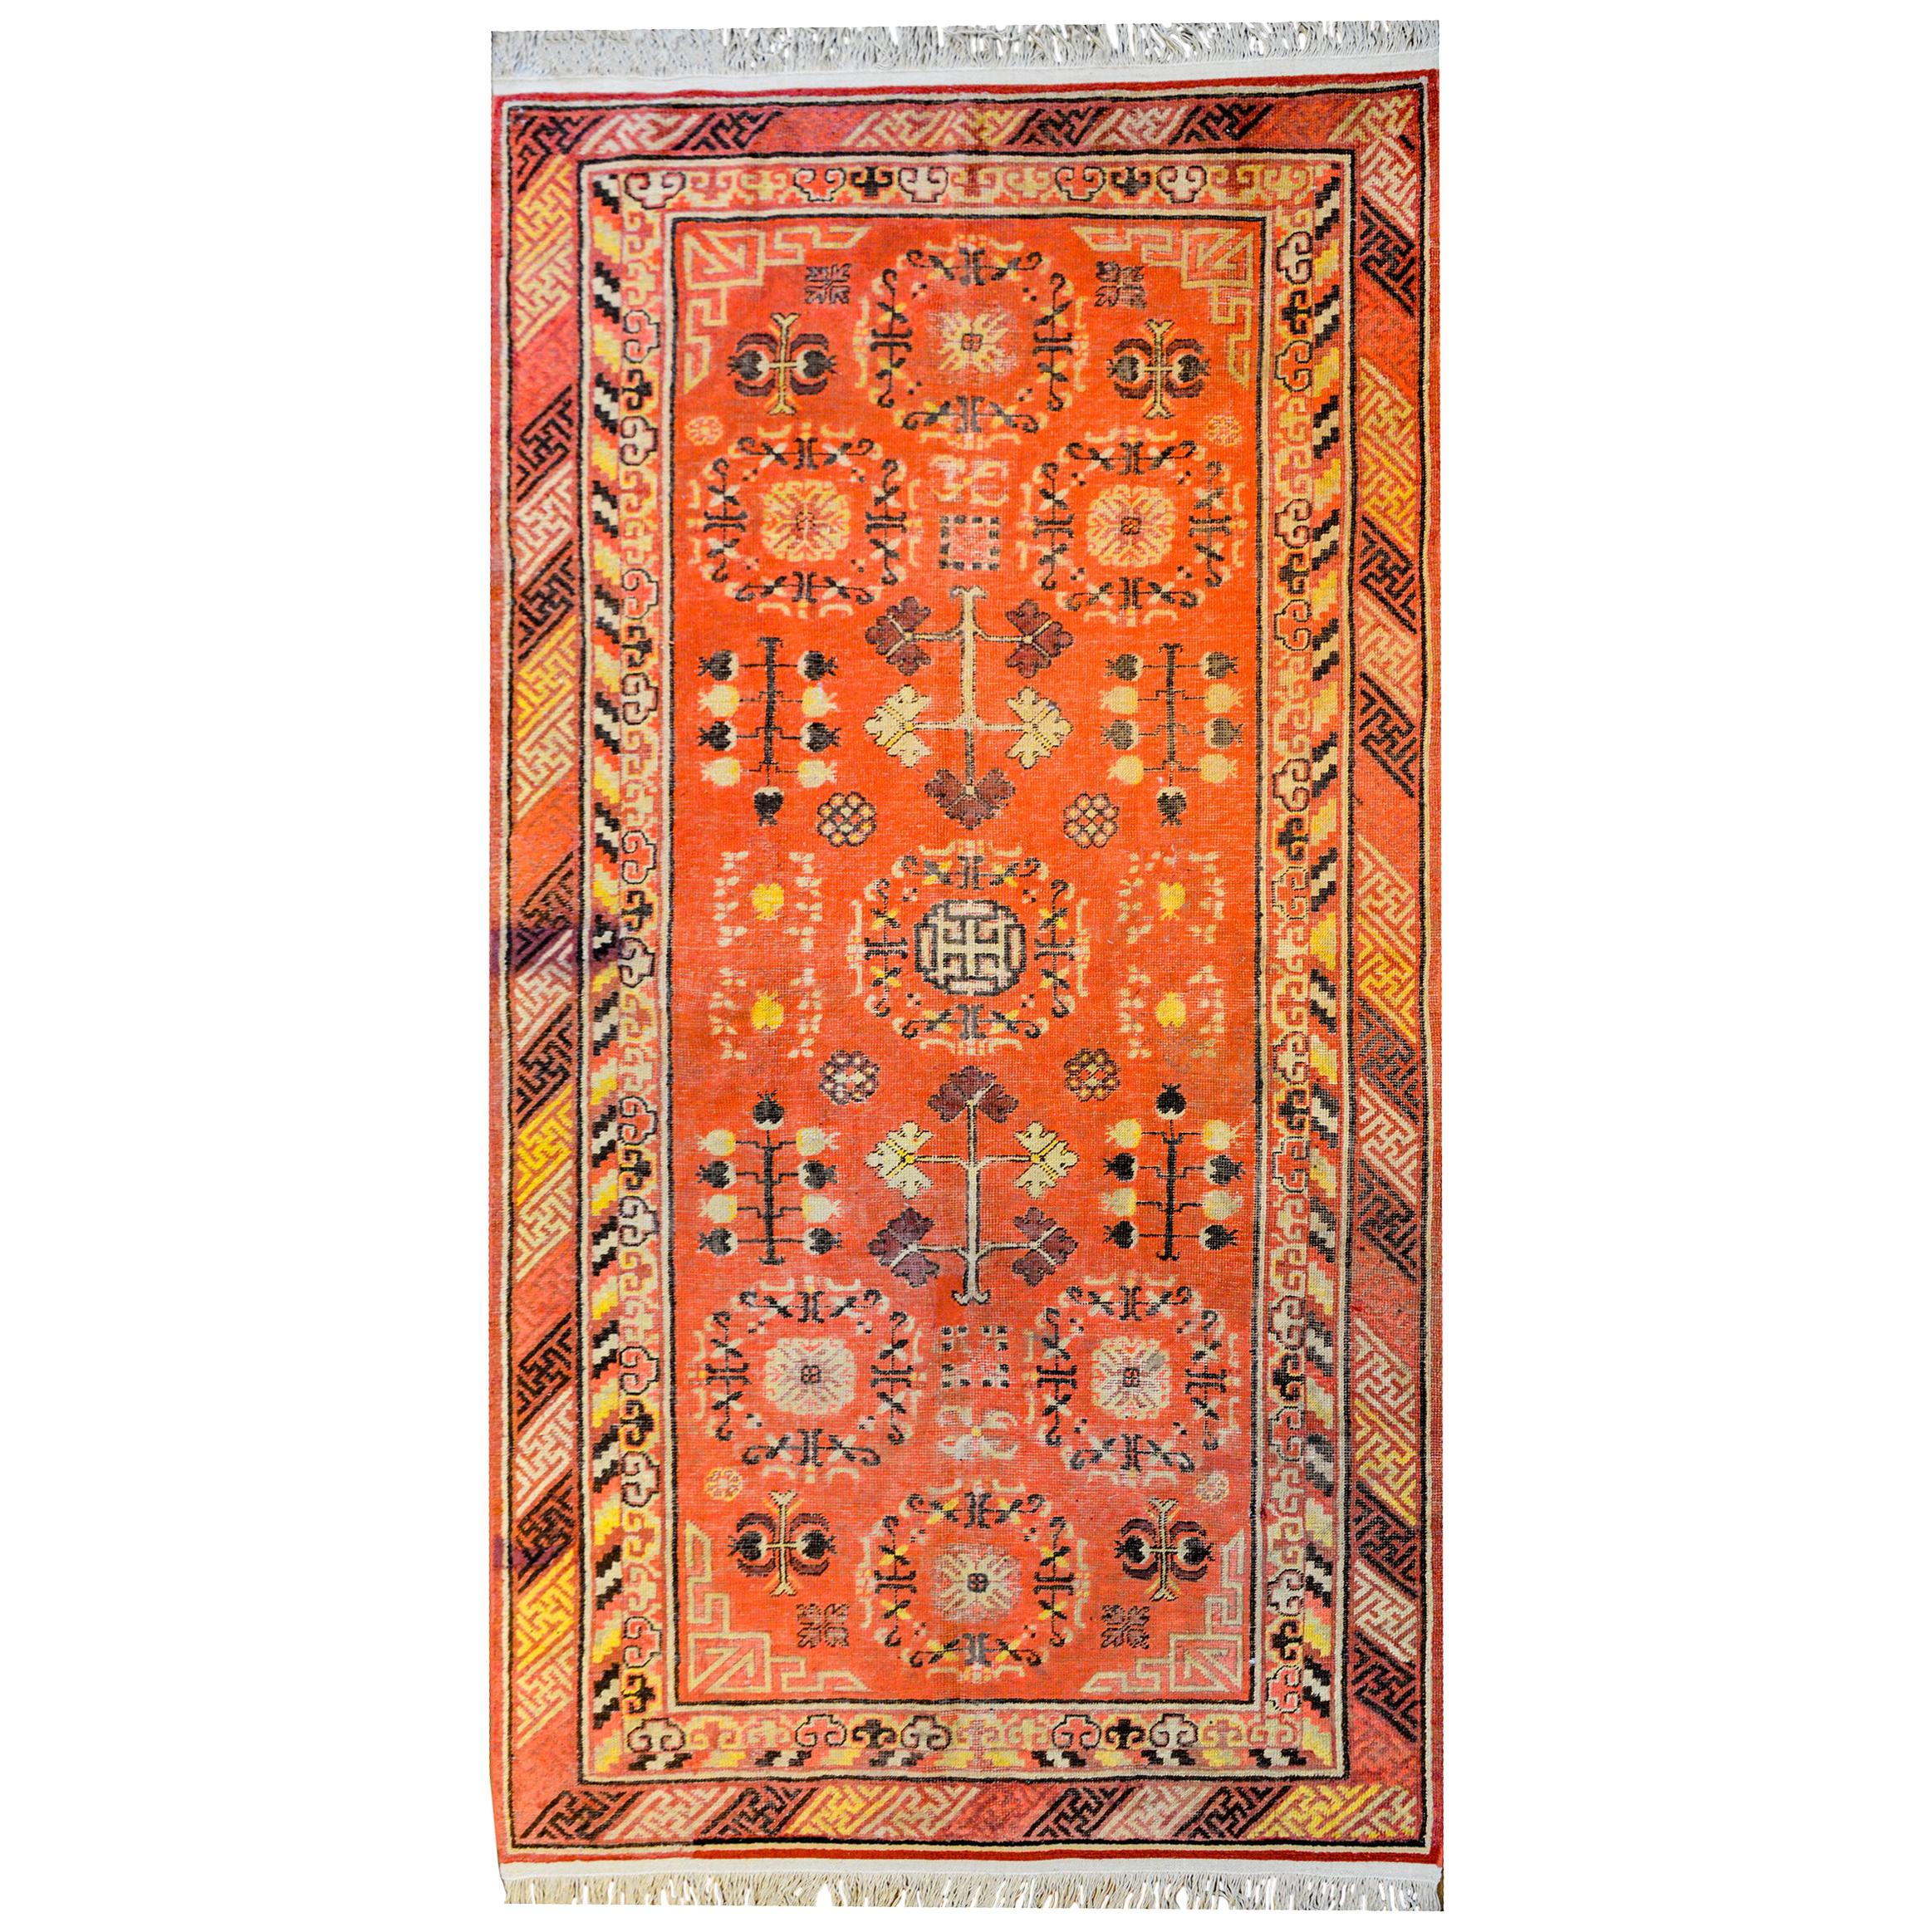 Wonderful Early 20th Century Central Asian Khotan Rug For Sale